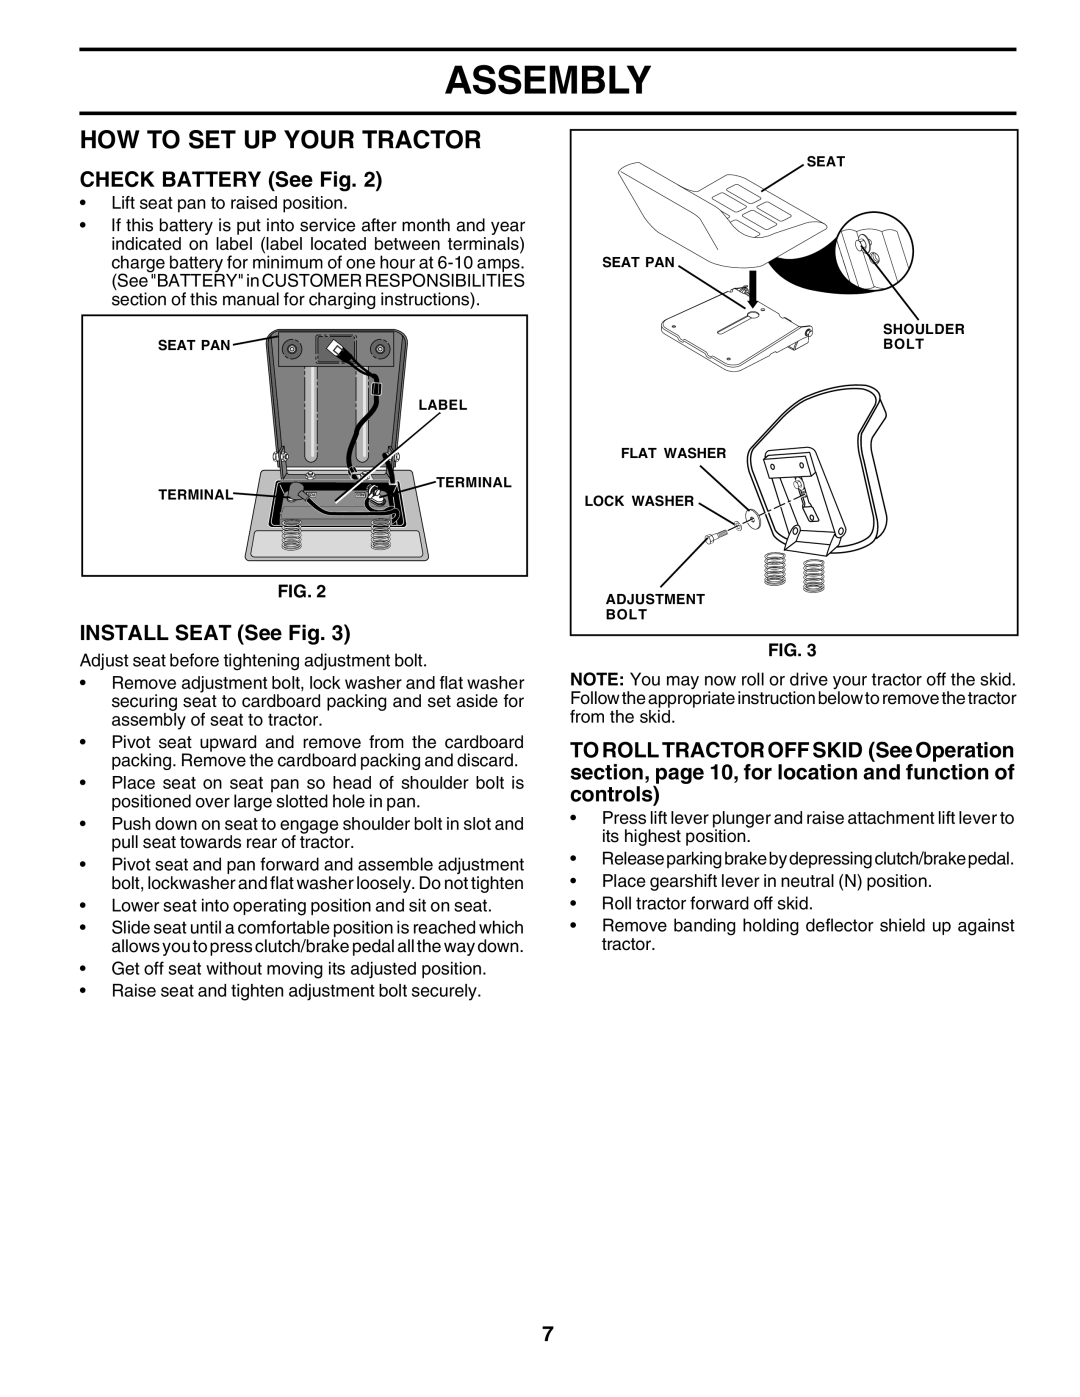 Poulan PO14542E manual How To Set Up Your Tractor, CHECK BATTERY See Fig, INSTALL SEAT See Fig, Assembly 